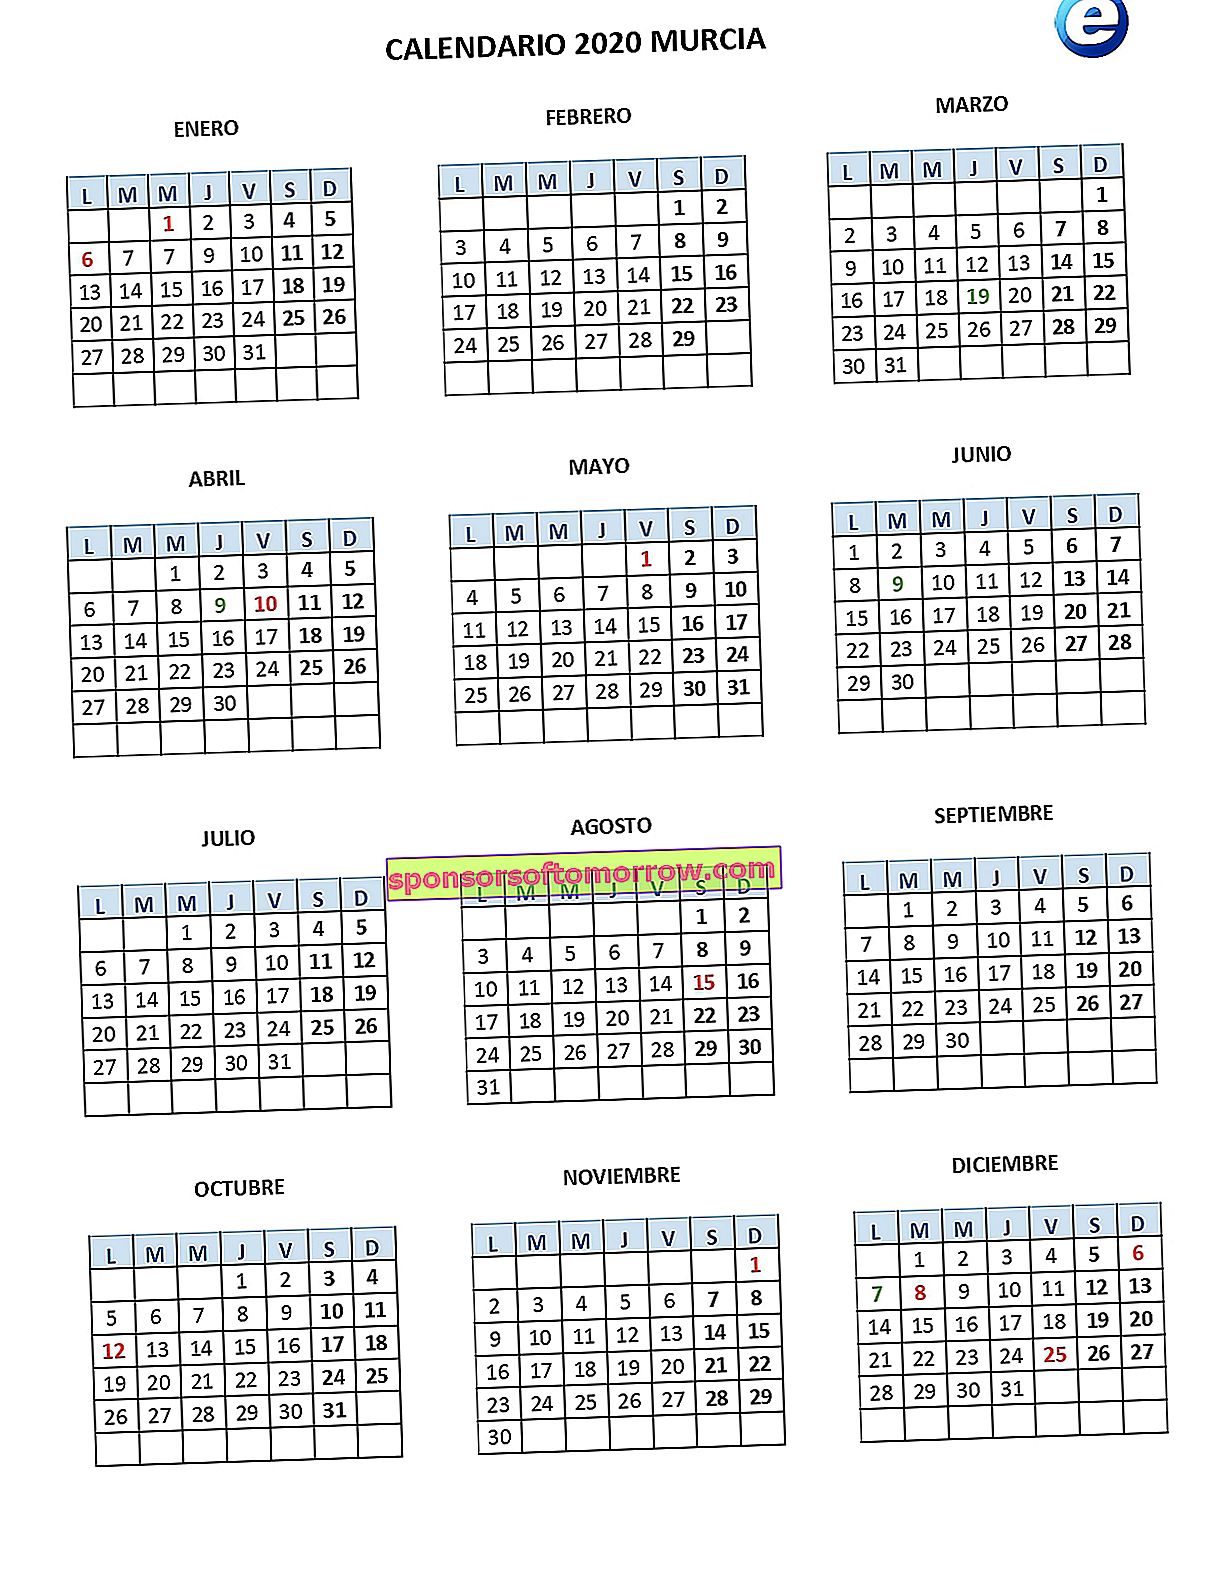 KALENDER Murcia 2020_pages-to-jpg-0001